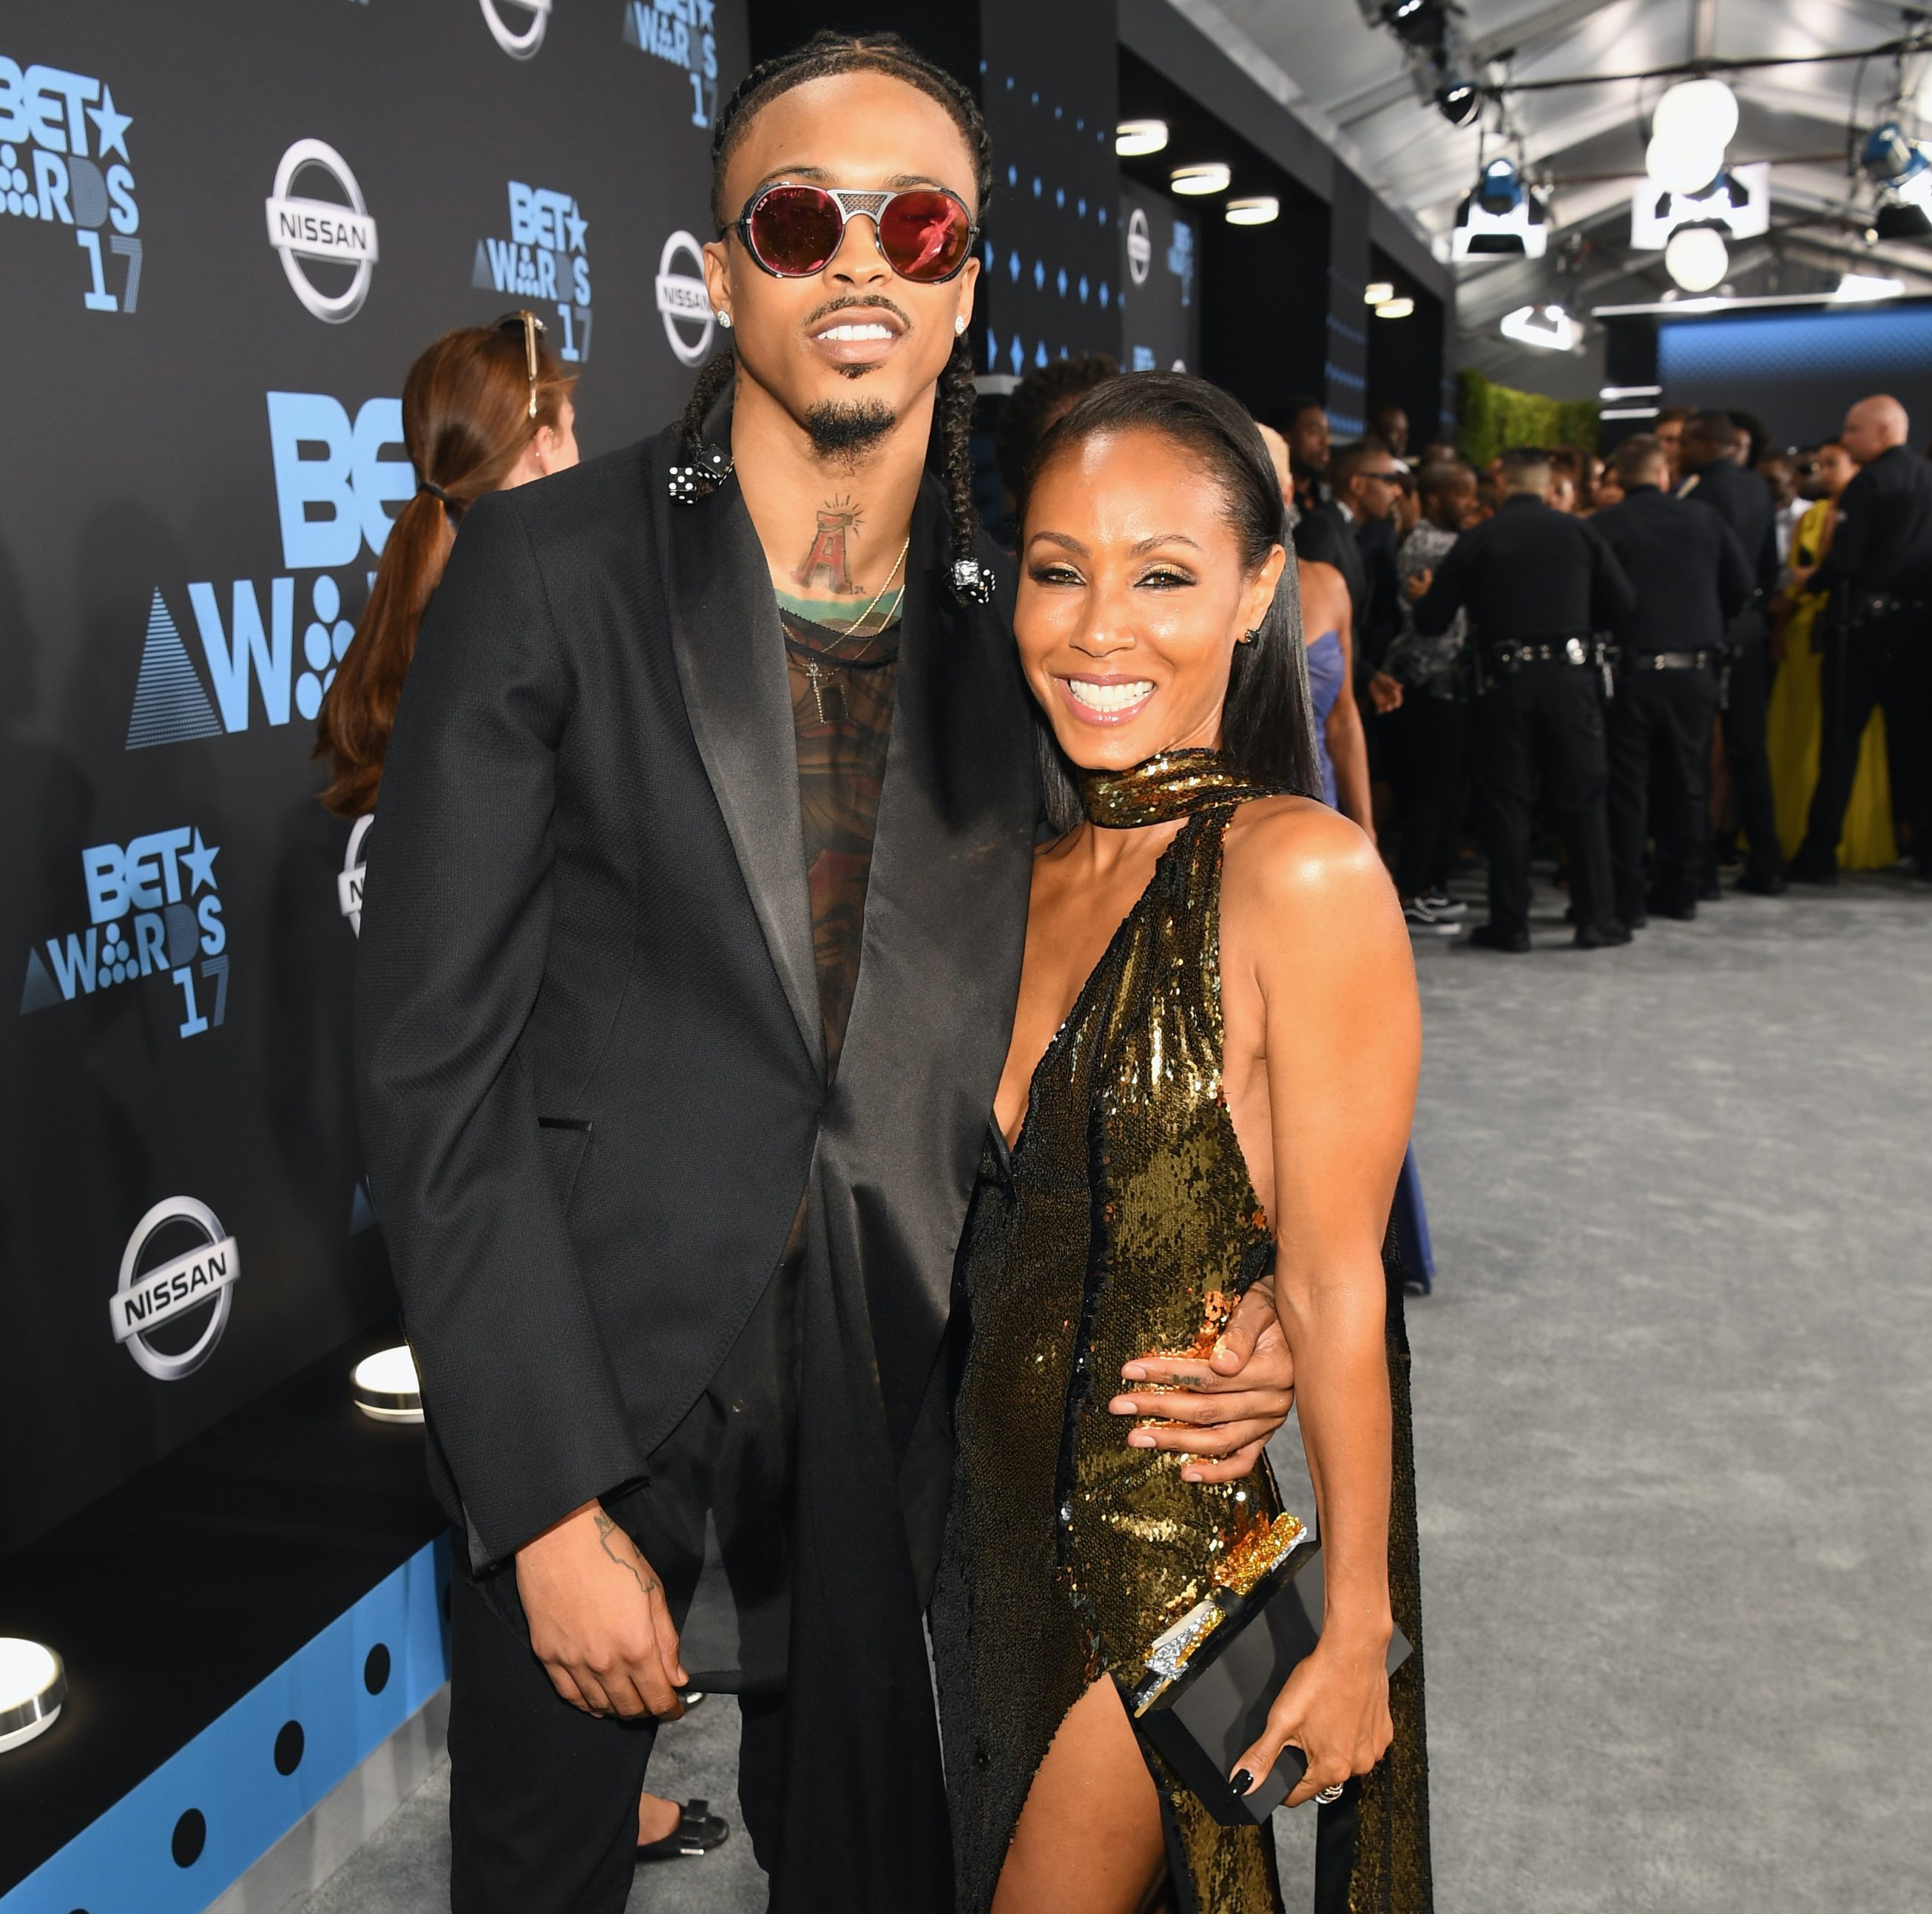 August Alsina Shares How Jada Pinkett Smith Romance Rumors Hurt His Ability To Make a Living for His Three Nieces: ‘It Really Started To Affect My Livelihood’